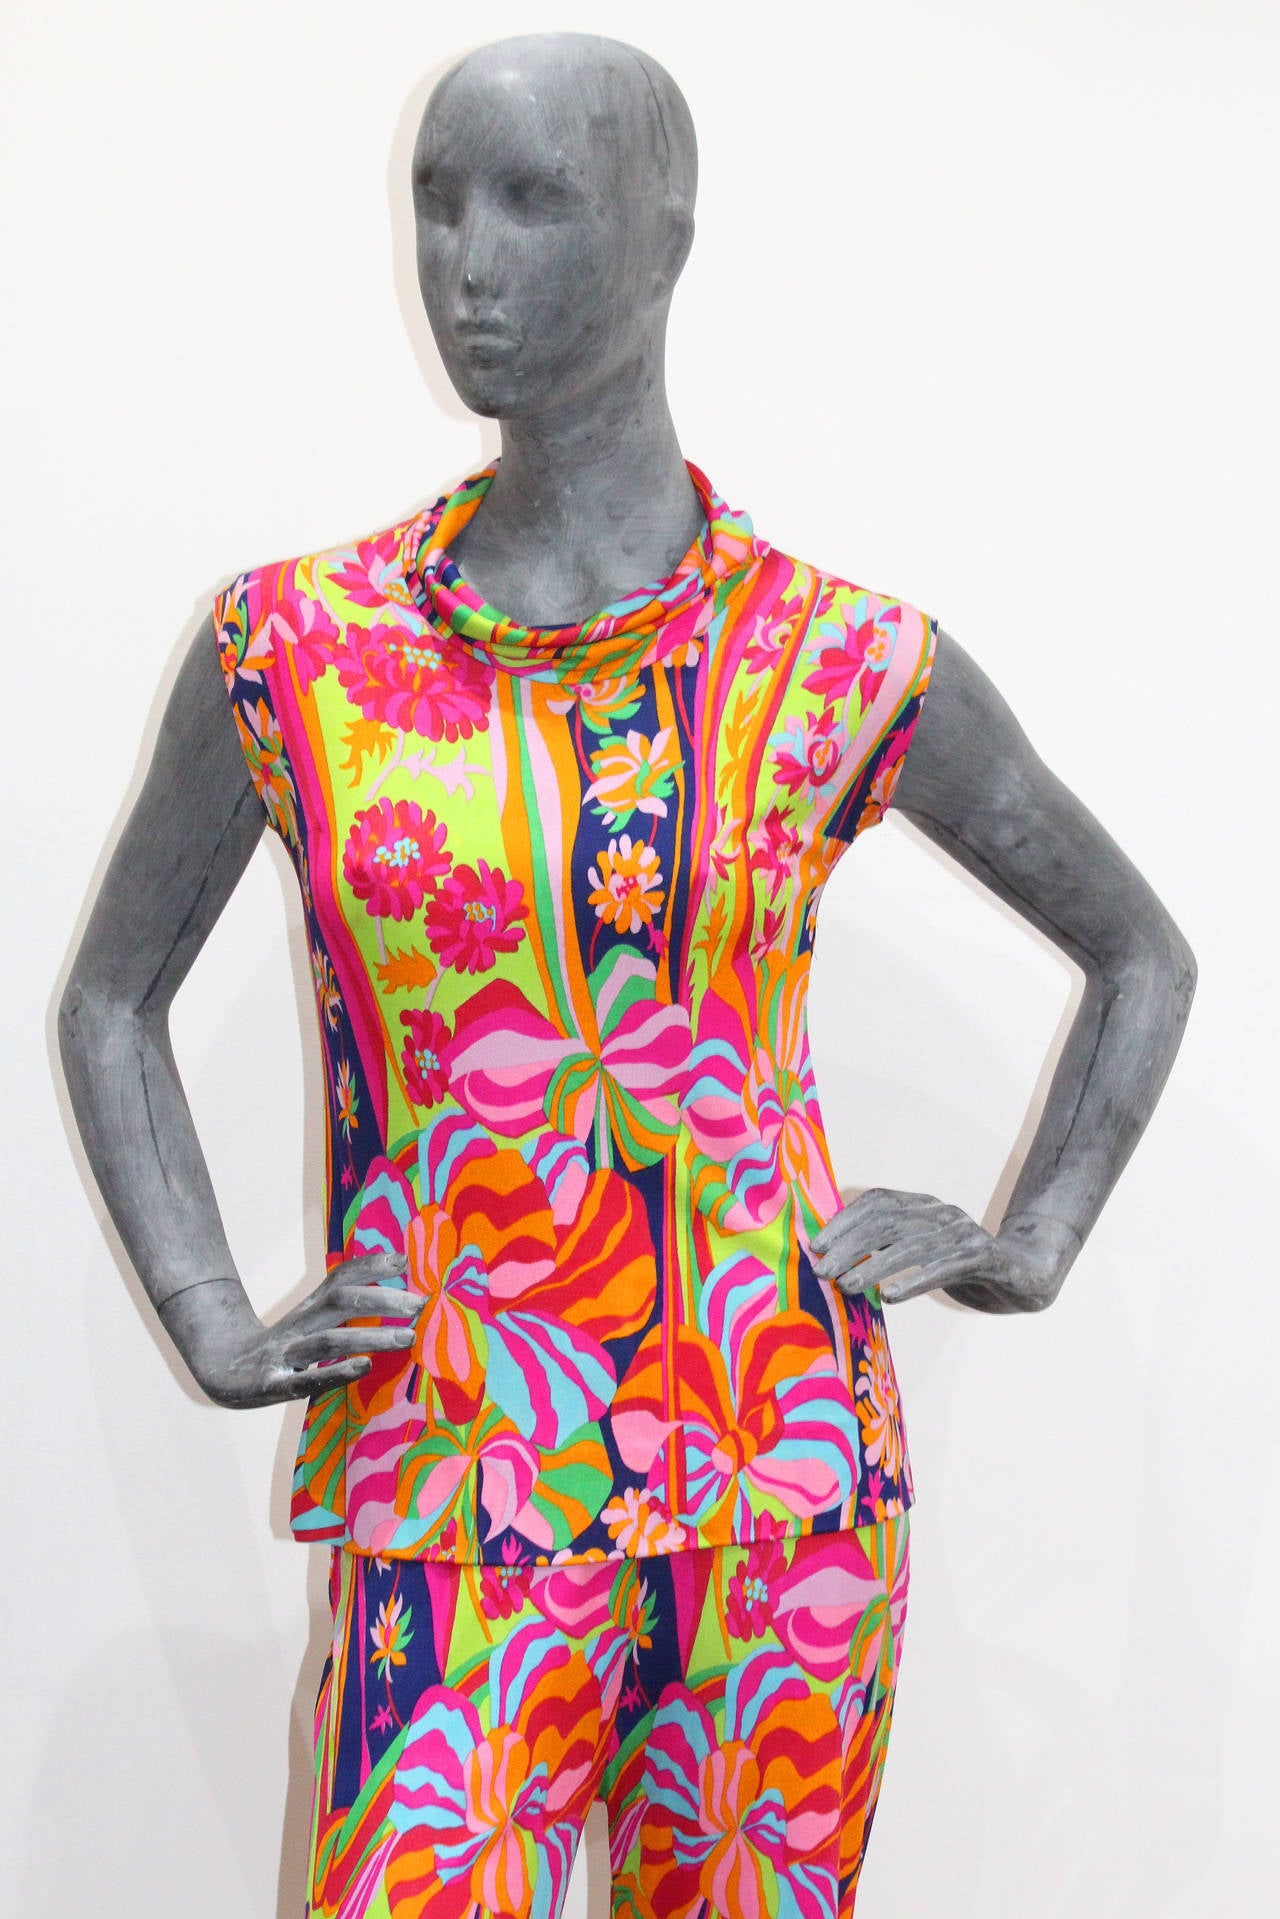 An original 1960s LEONARD PARIS 2 piece trouser suit in a psychedelic colourful print. The suit features flared pants and cow neck vest. The fabric is 100% silk jersey this fabric is light, smooth to the touch and falls beautifully.

Fr 38 / IT 42